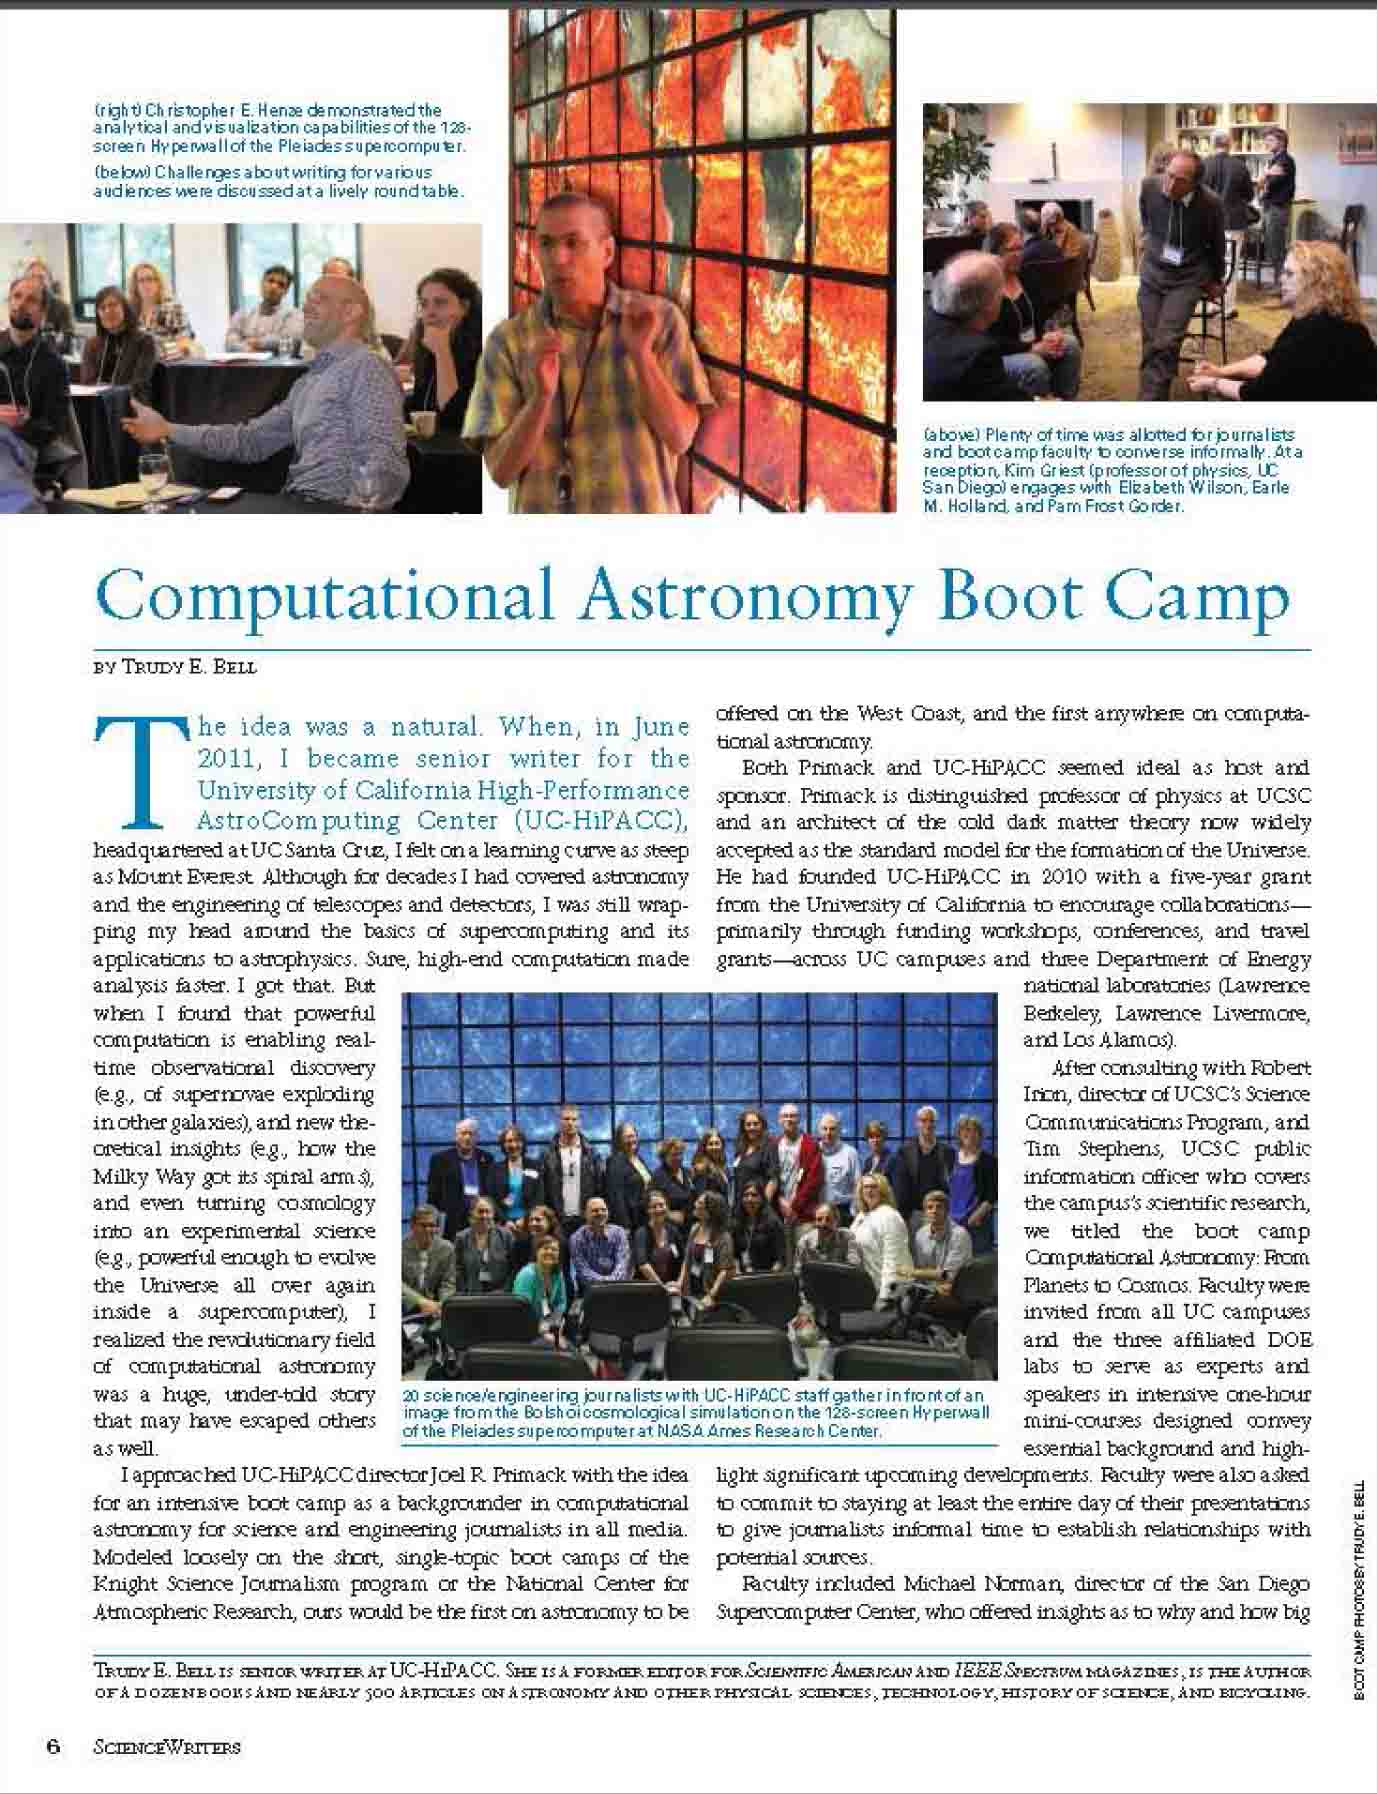 "A Computational Astronomy Boot Camp" article in ScienceWriters for NASW Winter 2013